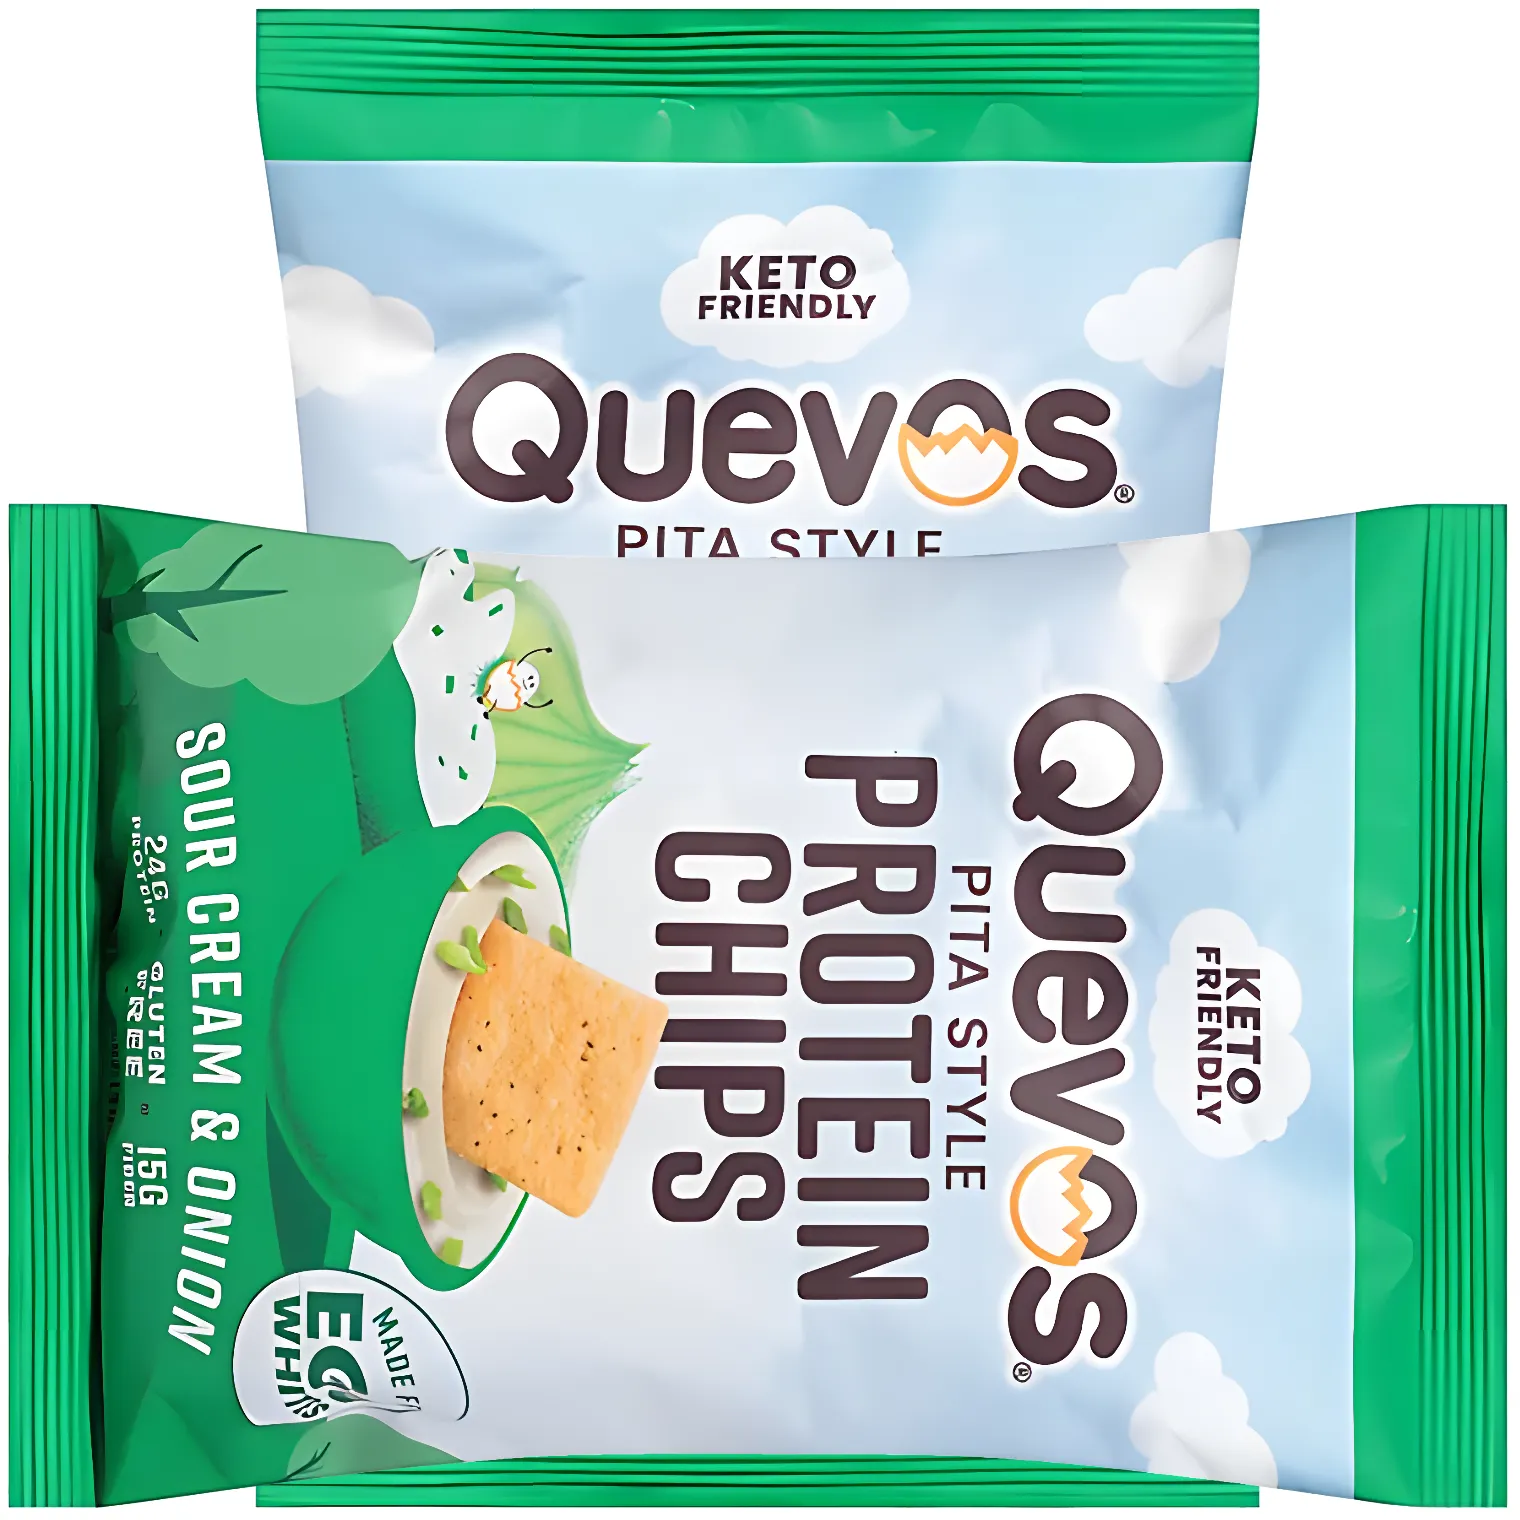 Free Quevos Crunchy Chips Made From Egg Whites